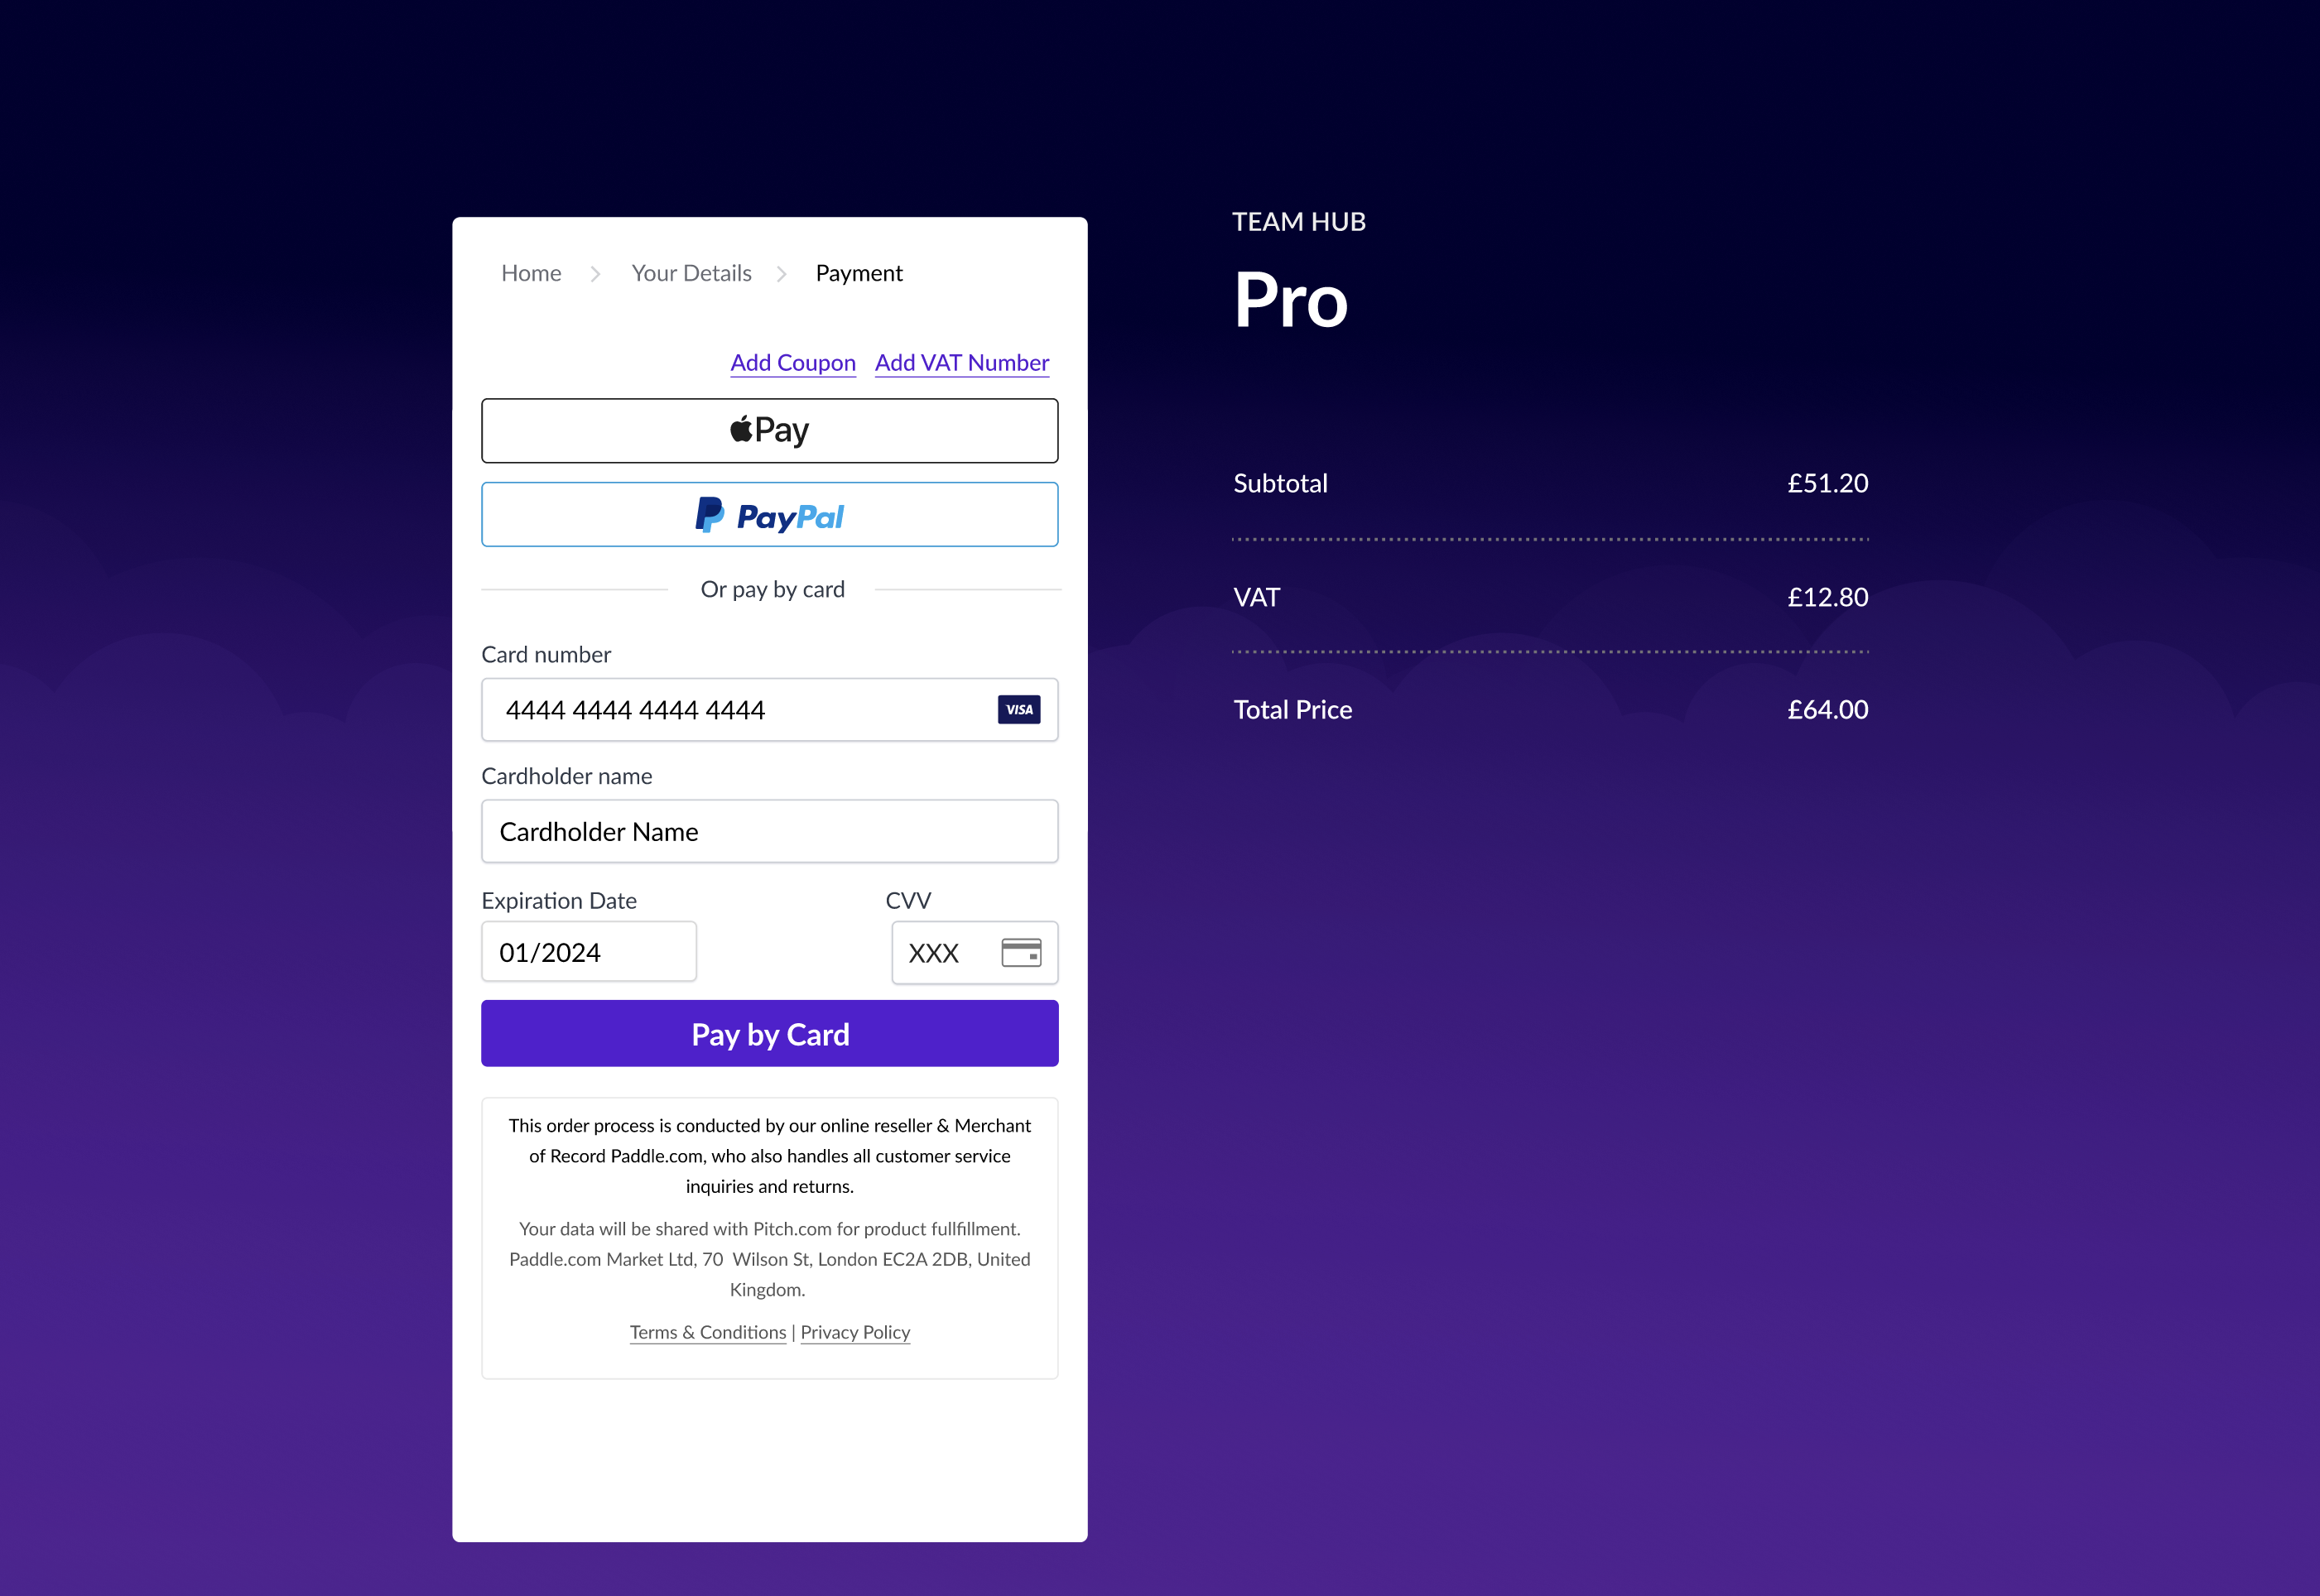 Screenshot showing the new simplified payment screen that includes card details